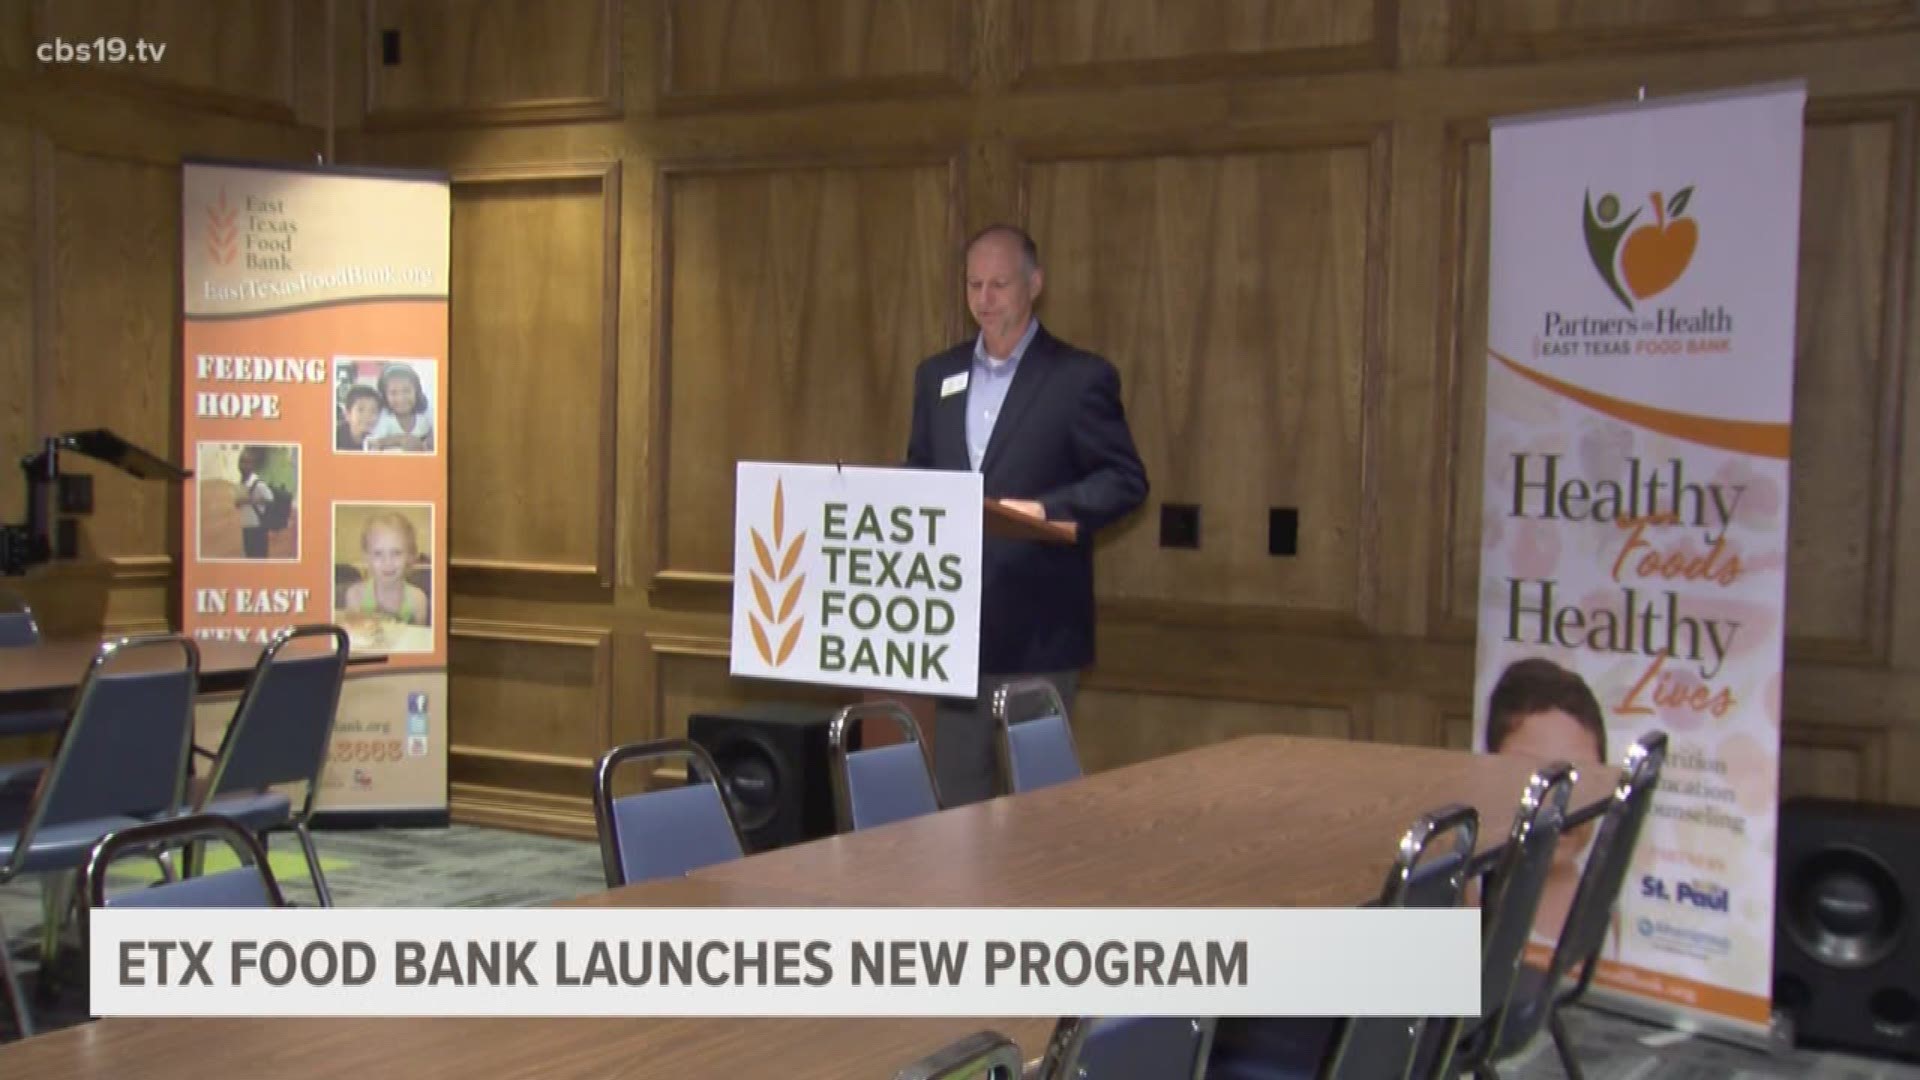 The East Texas Food Bank (ETFB) announces the launch of their new Partners in Health Program. The Partners in Health Program developed in collaboration with St. Paul Children?s Medical Clinic and UT Health Northeast addresses food insecurity, a major pub